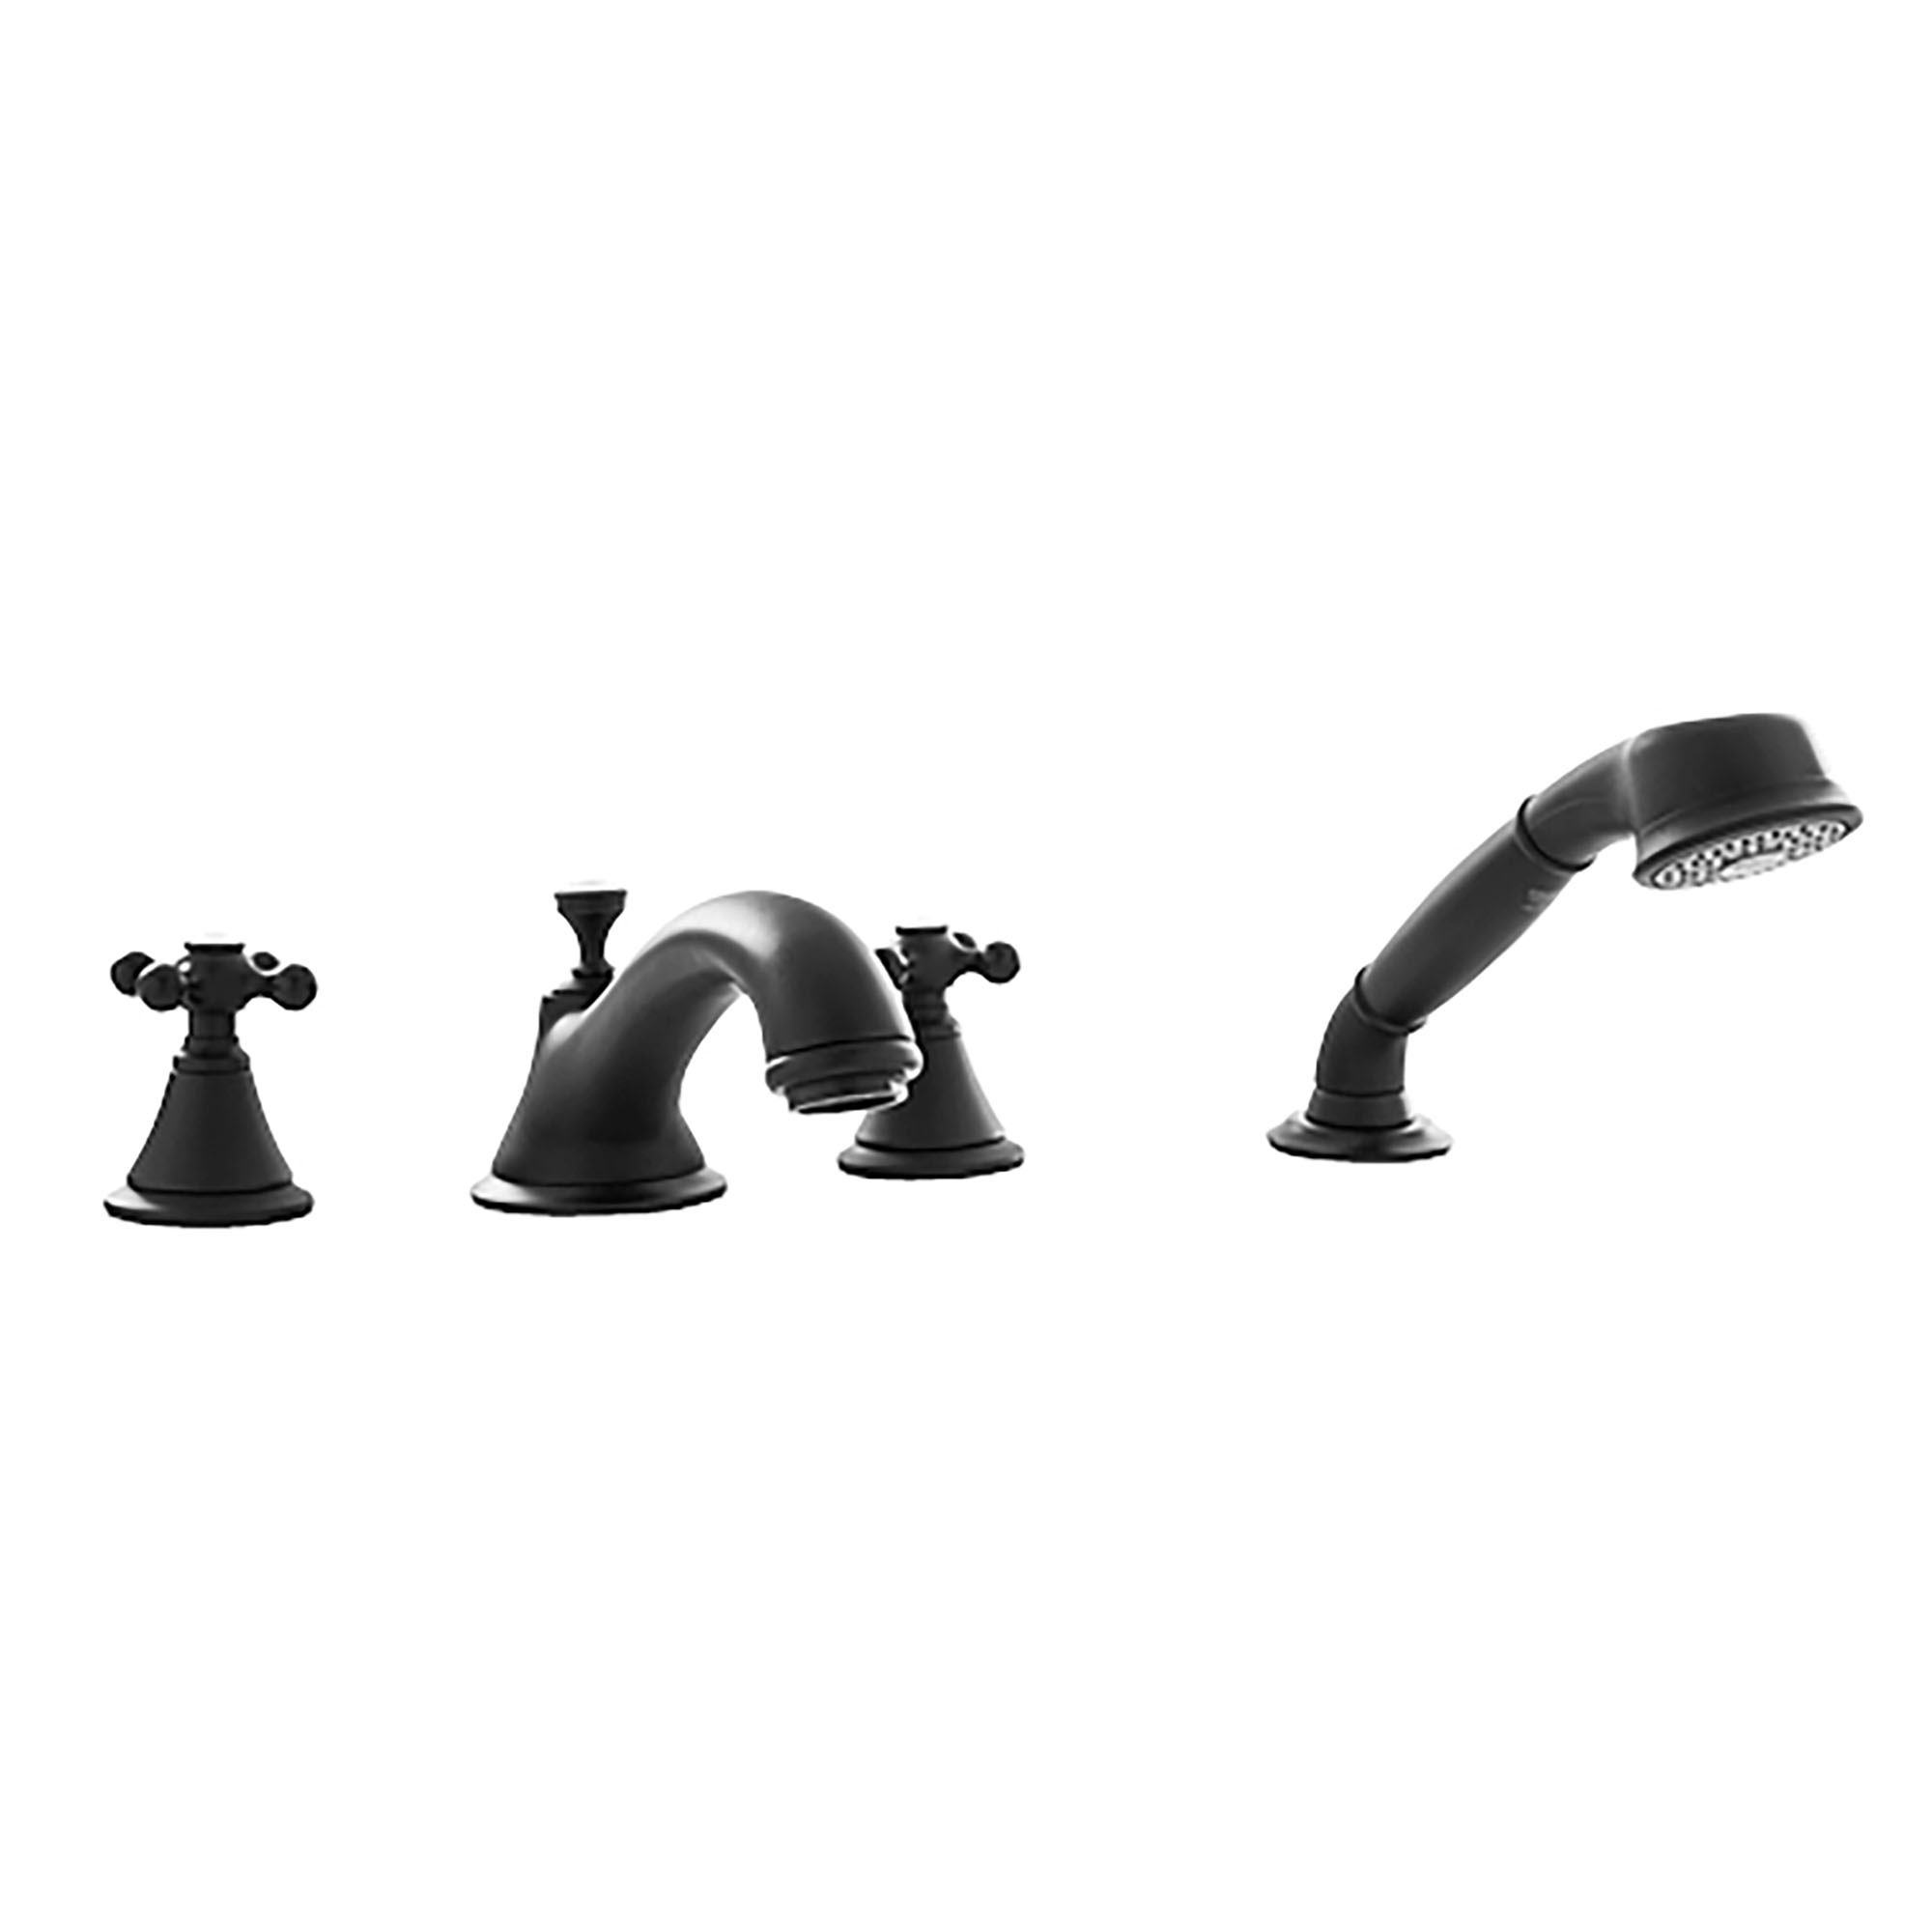 4-Hole 2-Handle Deck Mount Roman Tub Faucet with 2.5 GPM Hand Shower